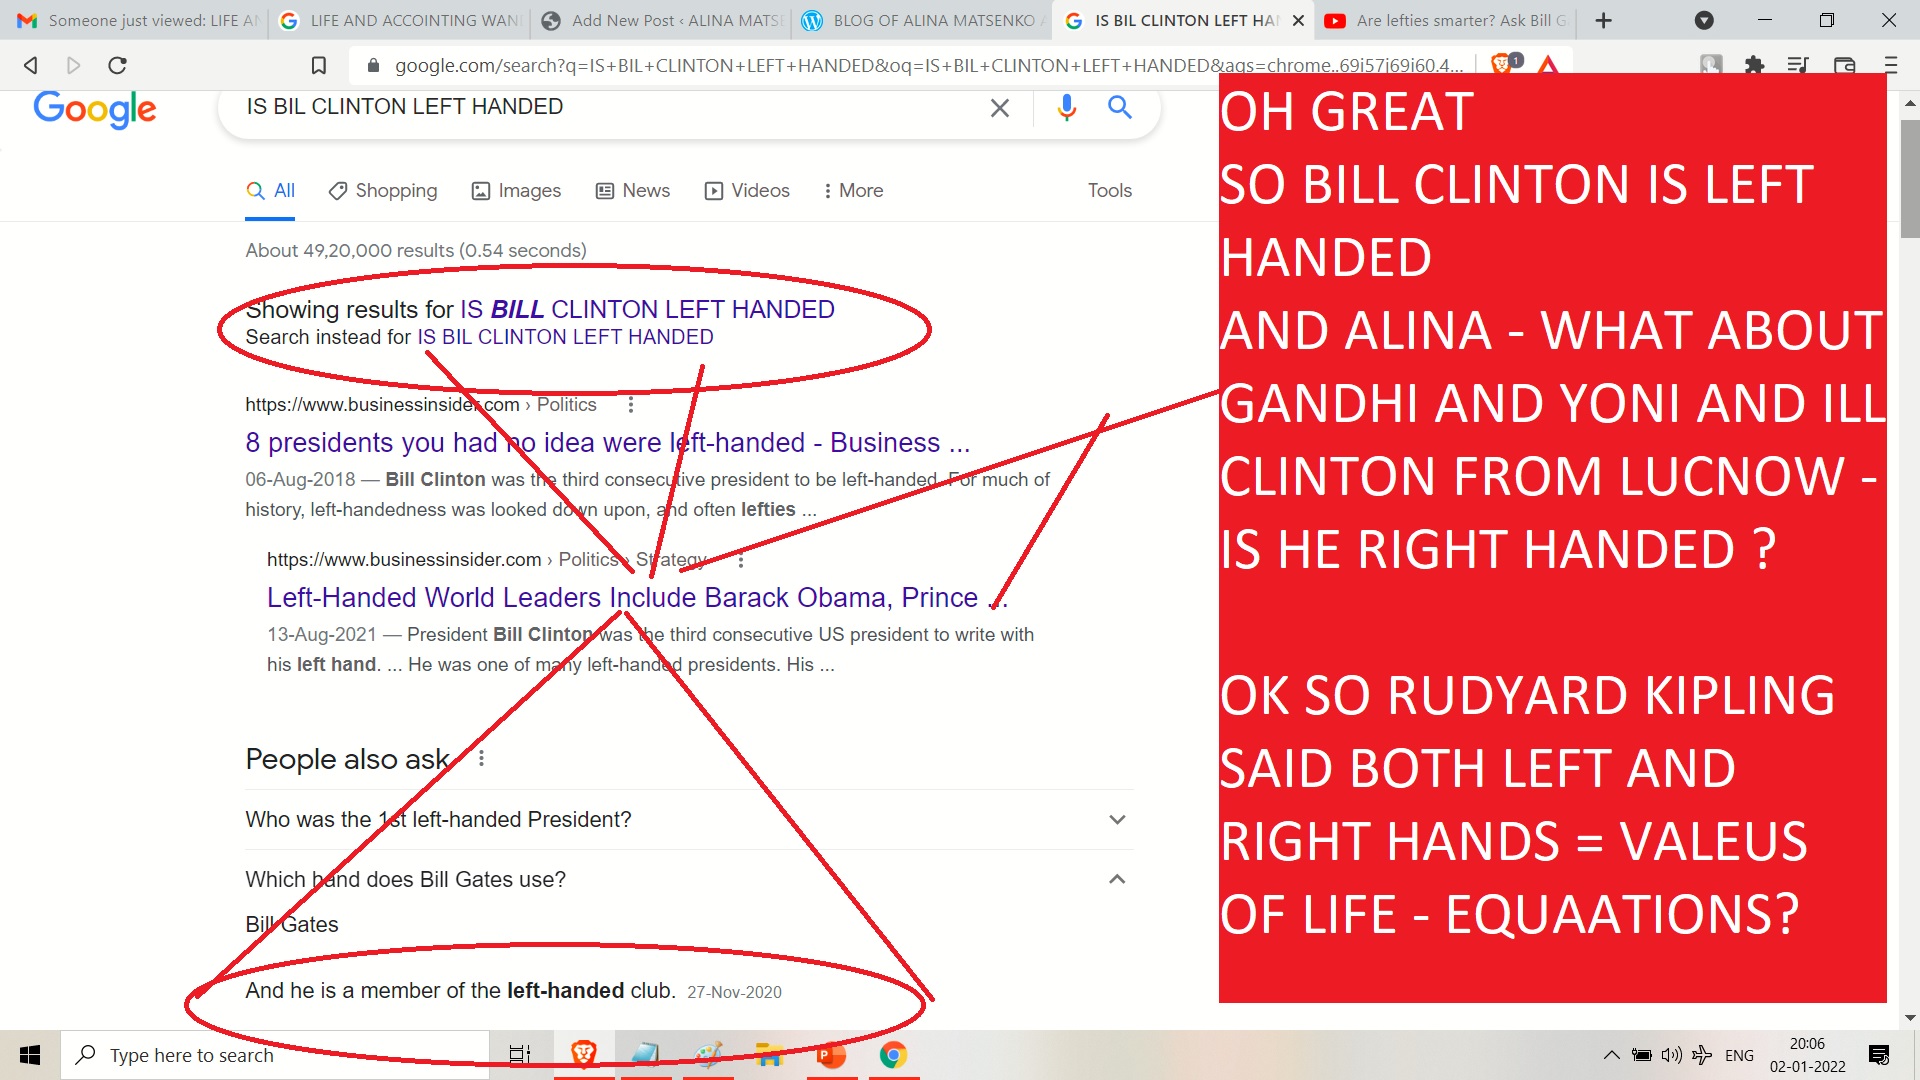 OH GREAT SO BILL CLINTON IS LEFT HANDED AND WHAT ABOUT GANDHI AND KENNEDYAND ILL CLINTON AND YONI NETANAHYHU FORM LUCKNOW HE RIGHT HANDED ALINA MATSENKO MESAHEB SO GEAT RUDYARD KIPLNG SAID BOTH LET AND RIGHT HANDE